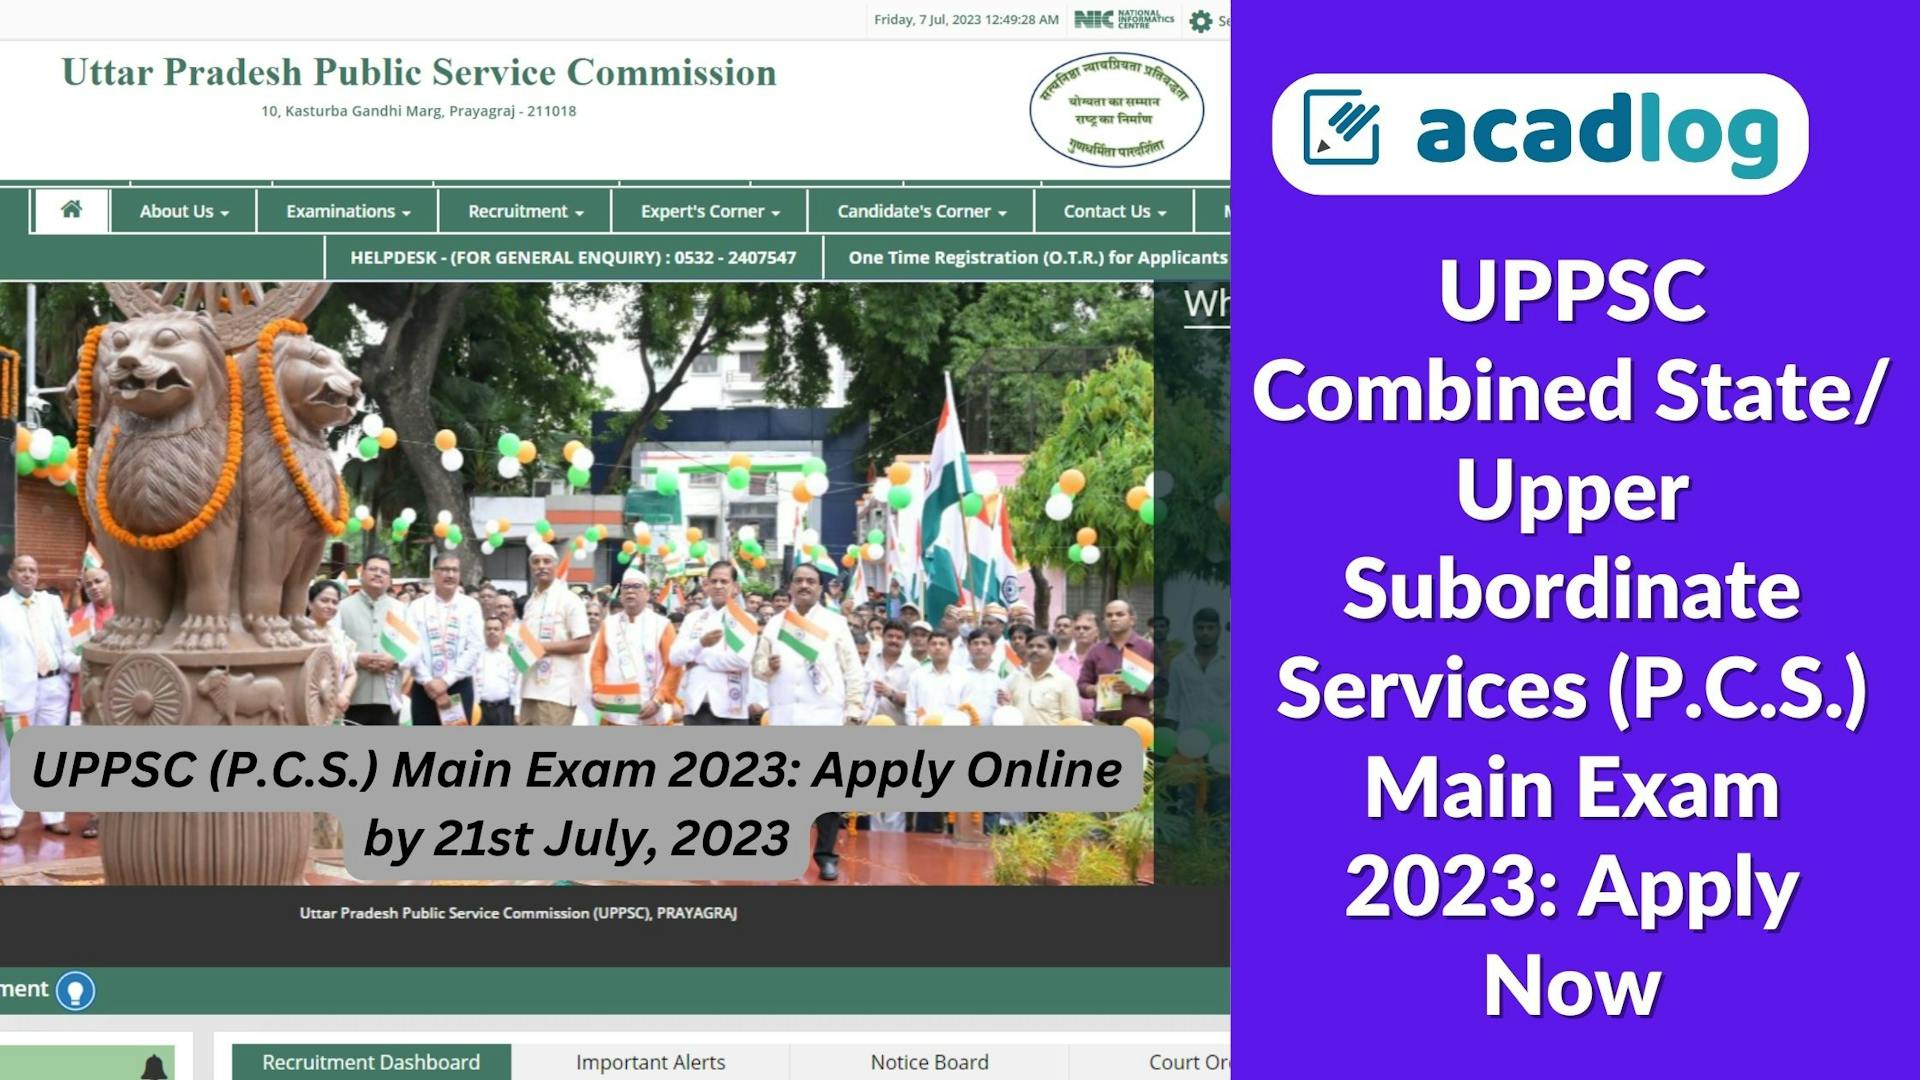 UPPSC Combined State/ Upper Subordinate Services (P.C.S.) Main Exam 2023: Apply Now